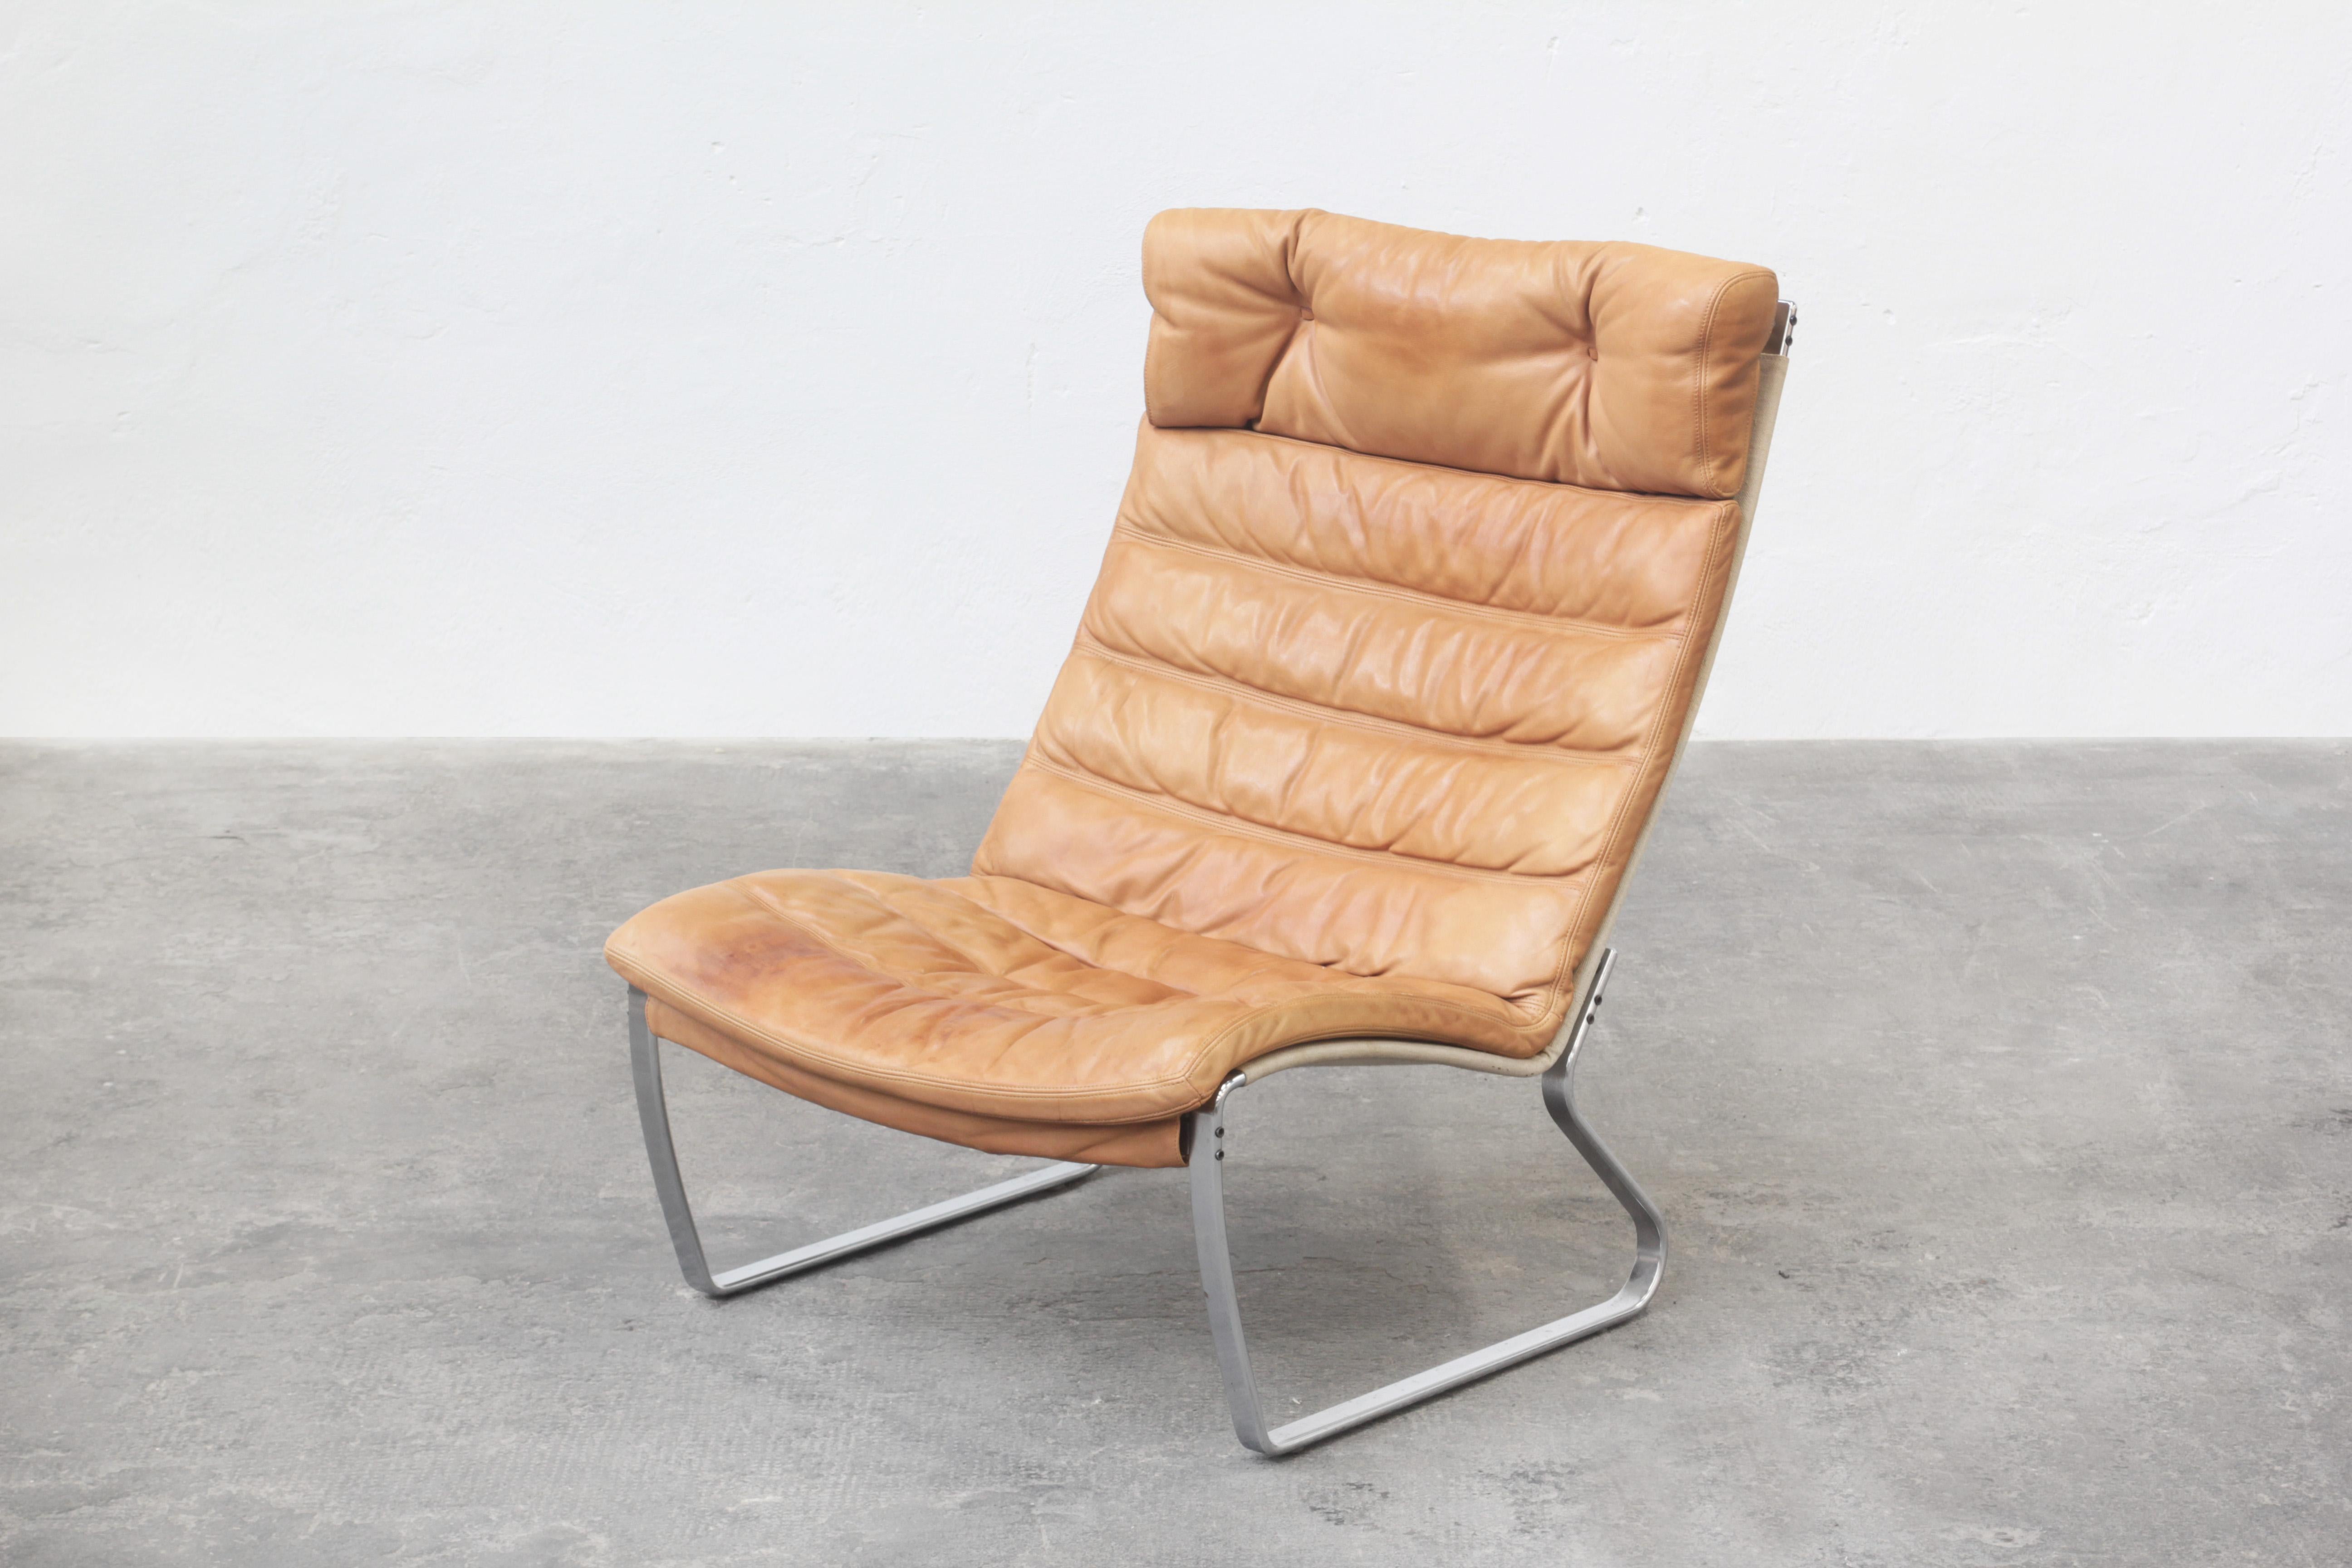 Stainless Steel Danish Lounge Chair by Jorgen Kastholm for Alfred Kill International, 1968